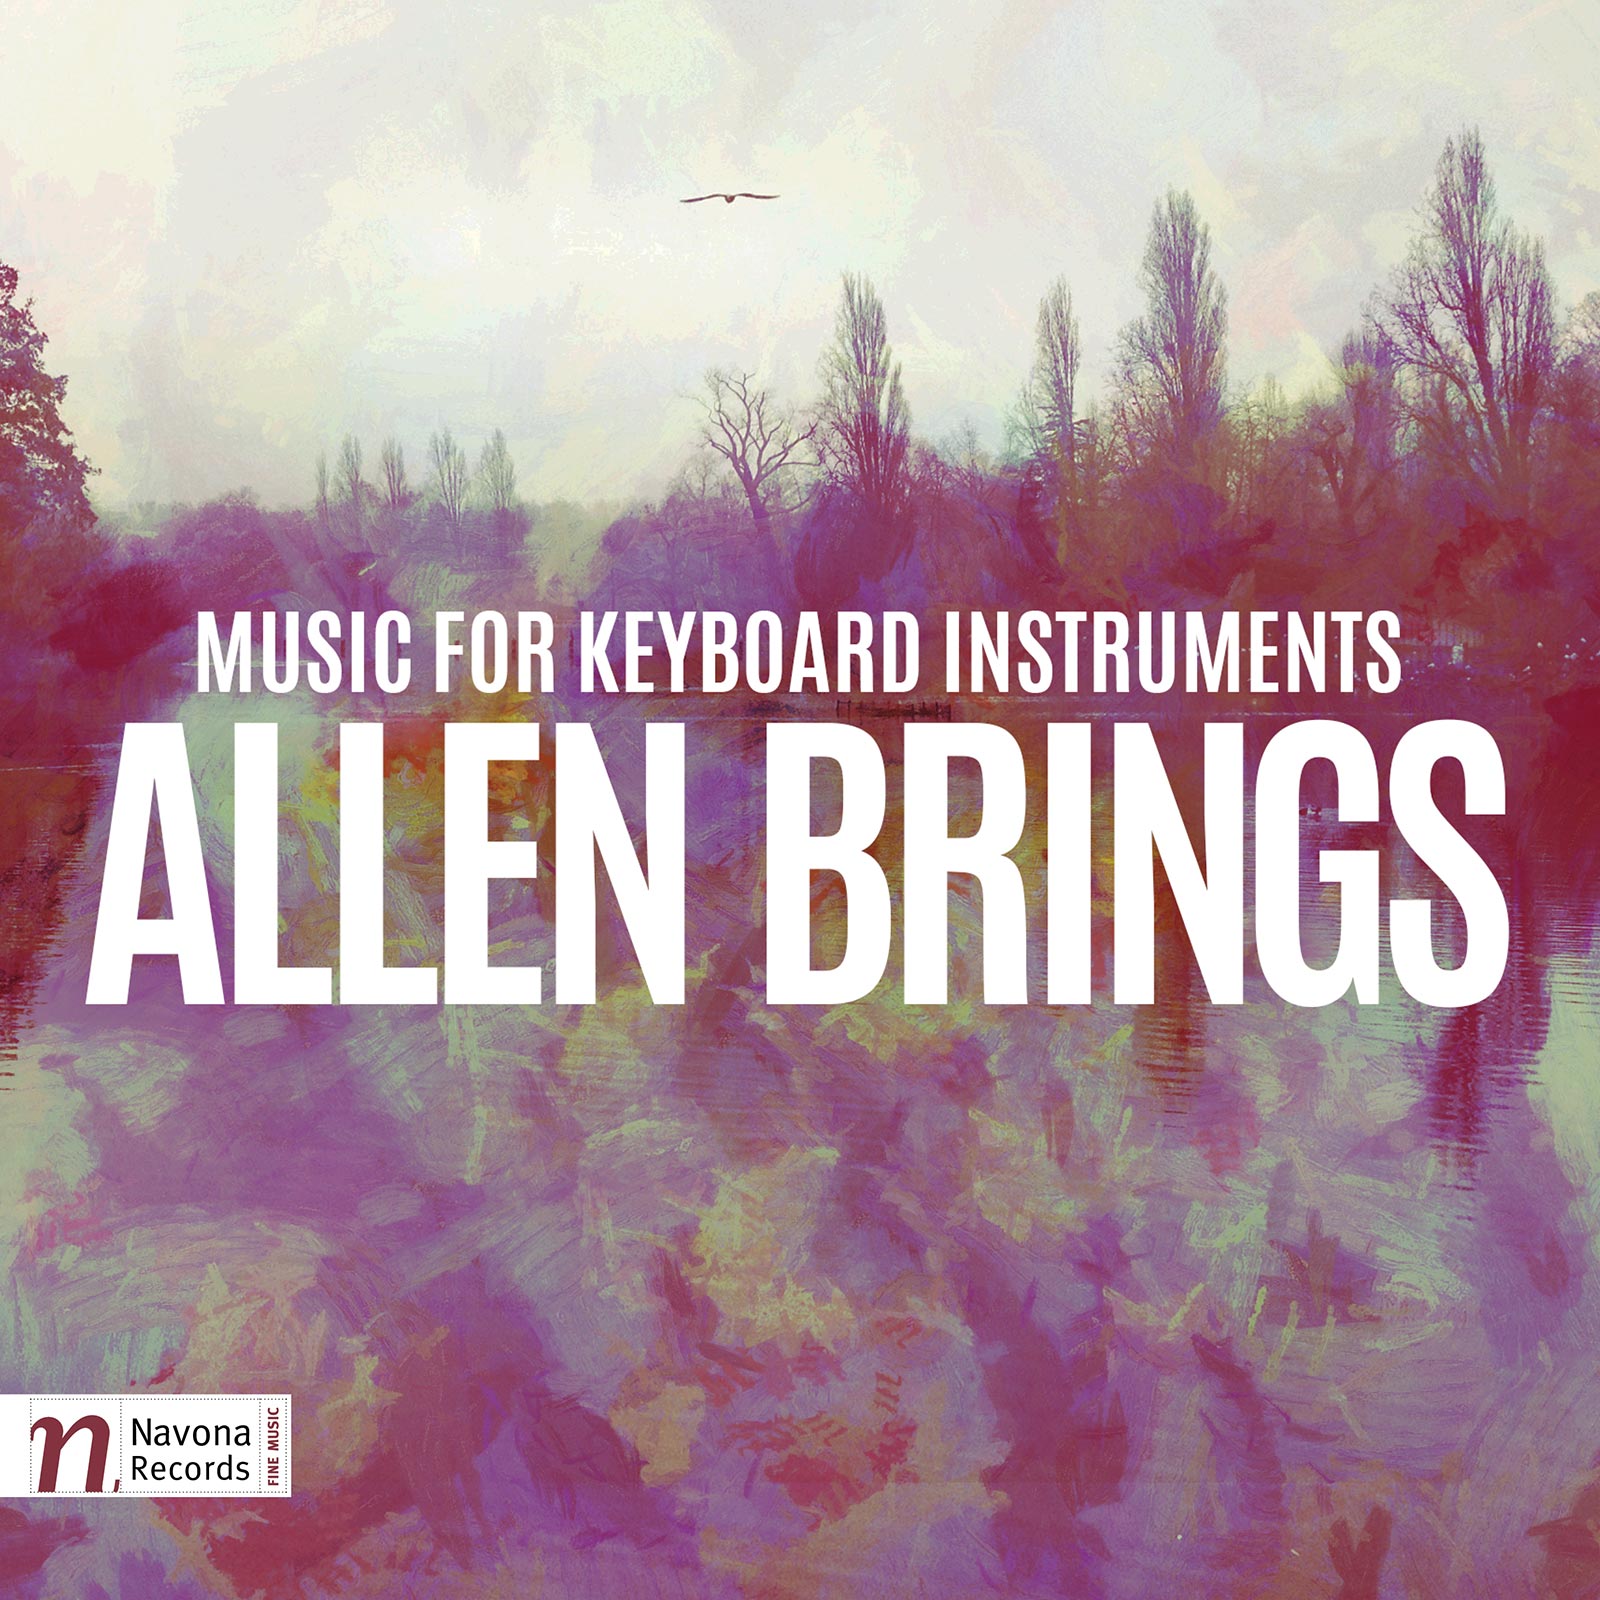 Capstone Re-release: Music for Keyboard Instruments